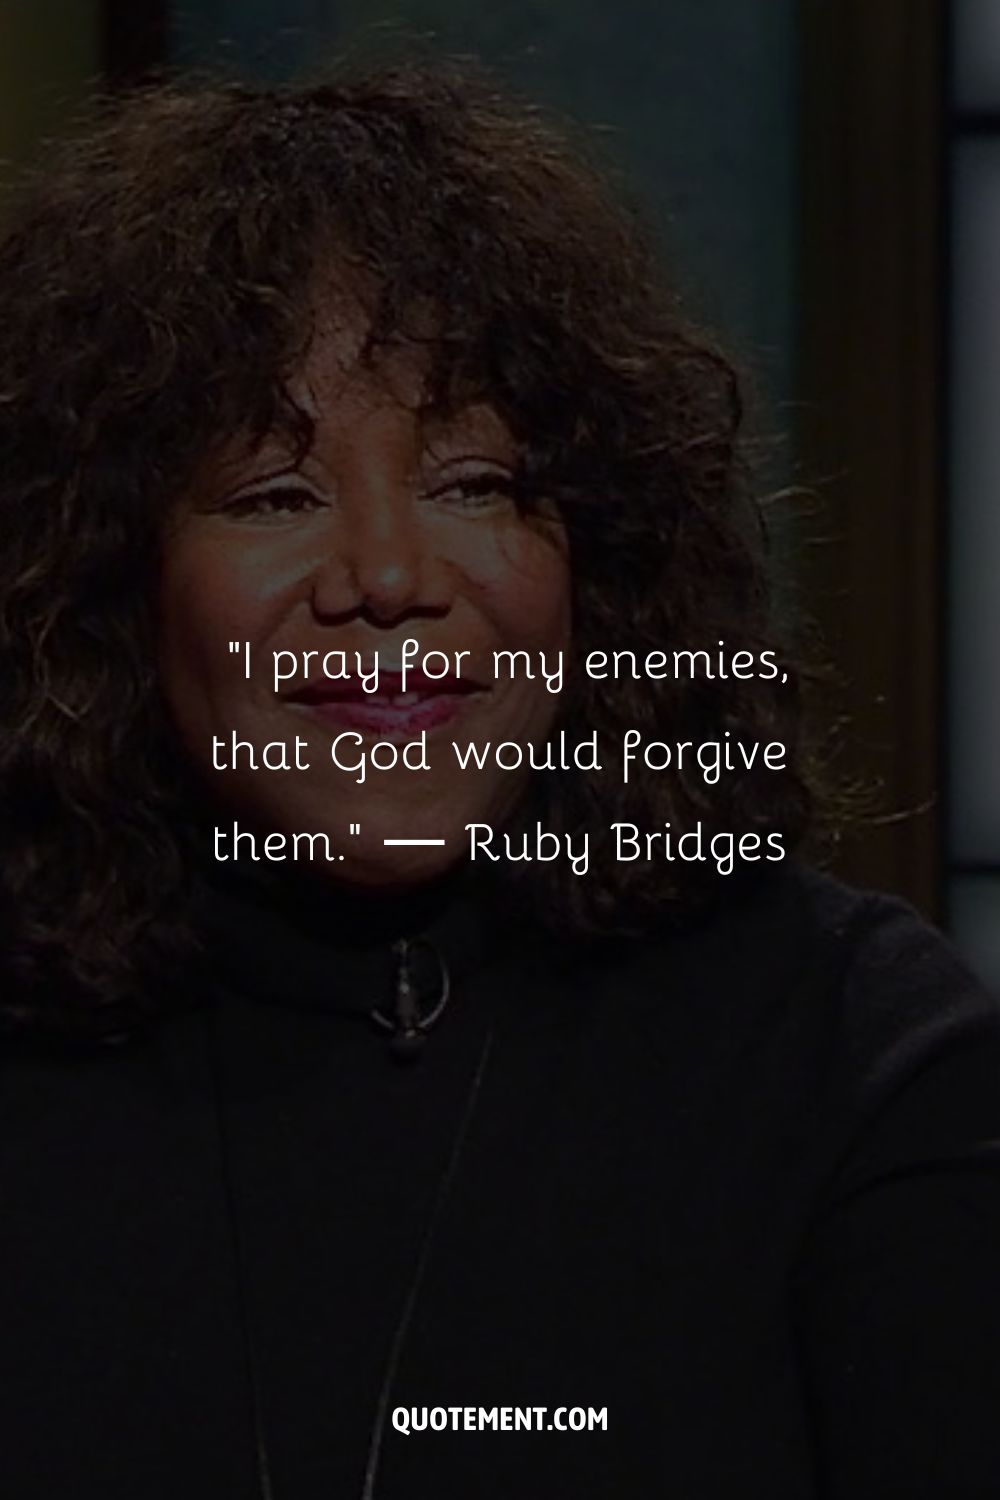 I pray for my enemies, that God would forgive them